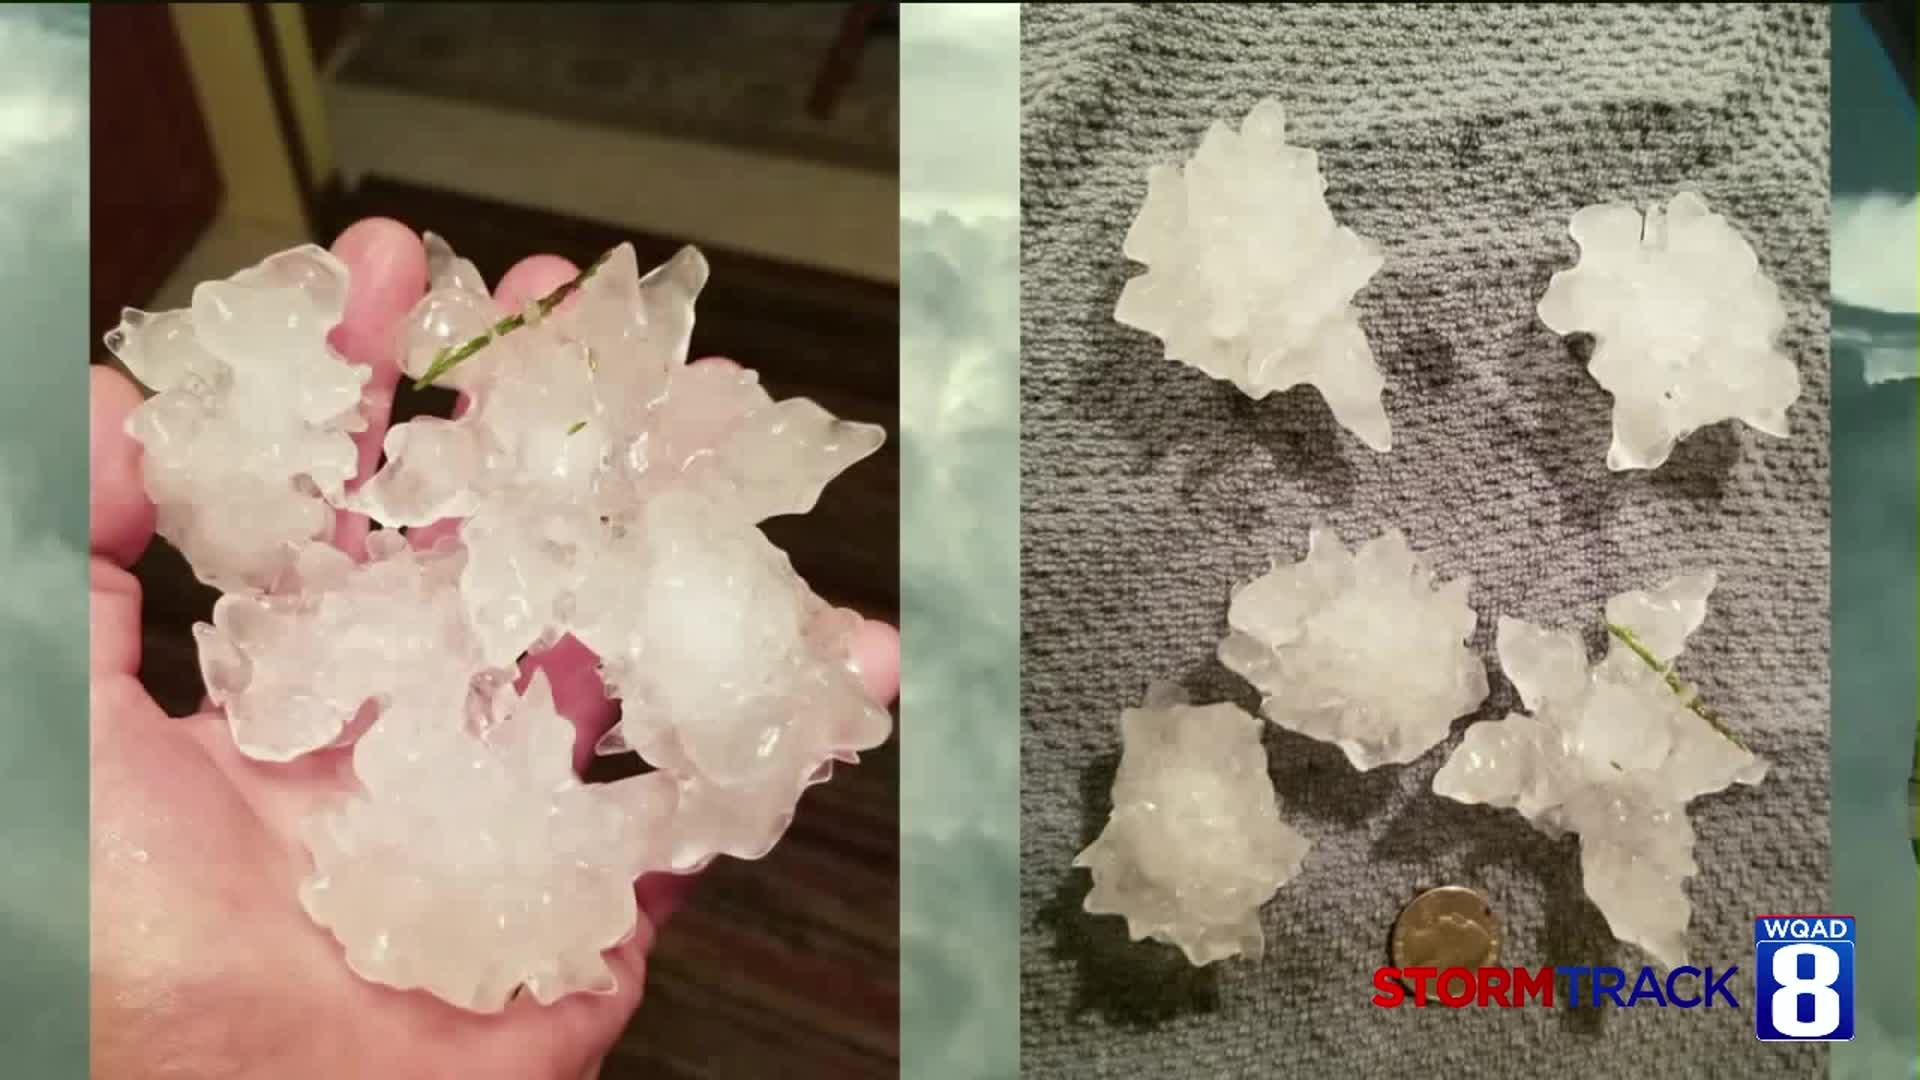 What causes "Zombie" Hail